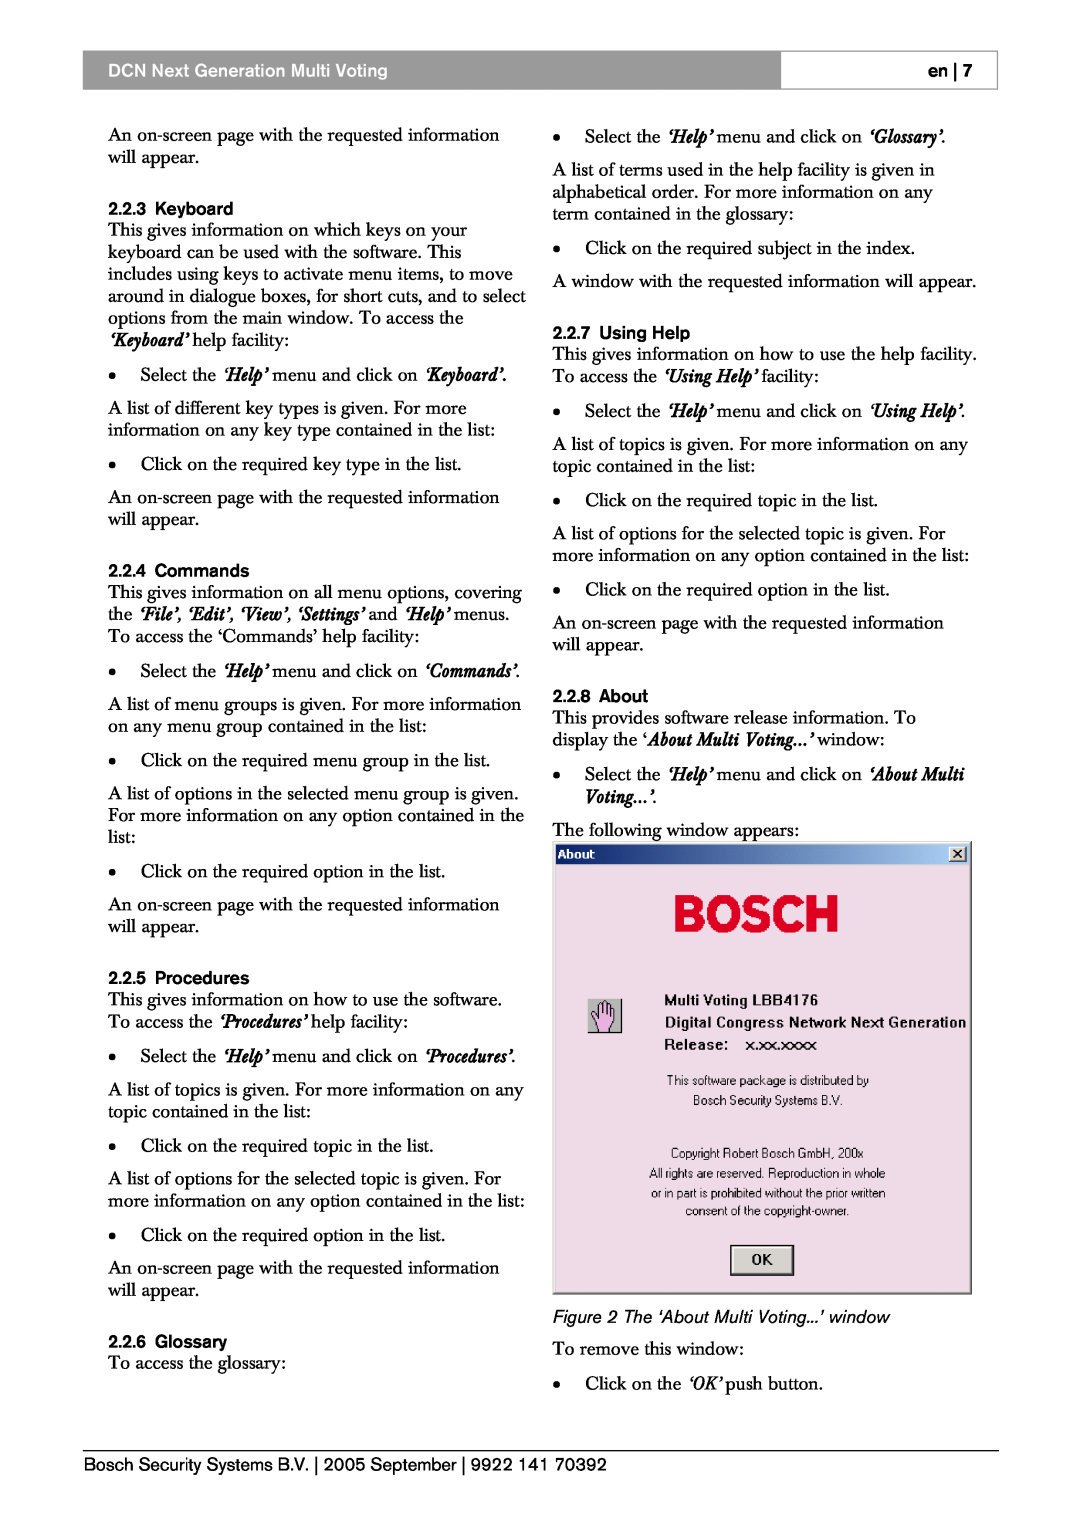 Bosch Appliances LBB 4176 user manual The ‘About Multi Voting...’ window, DCN Next Generation Multi Voting 